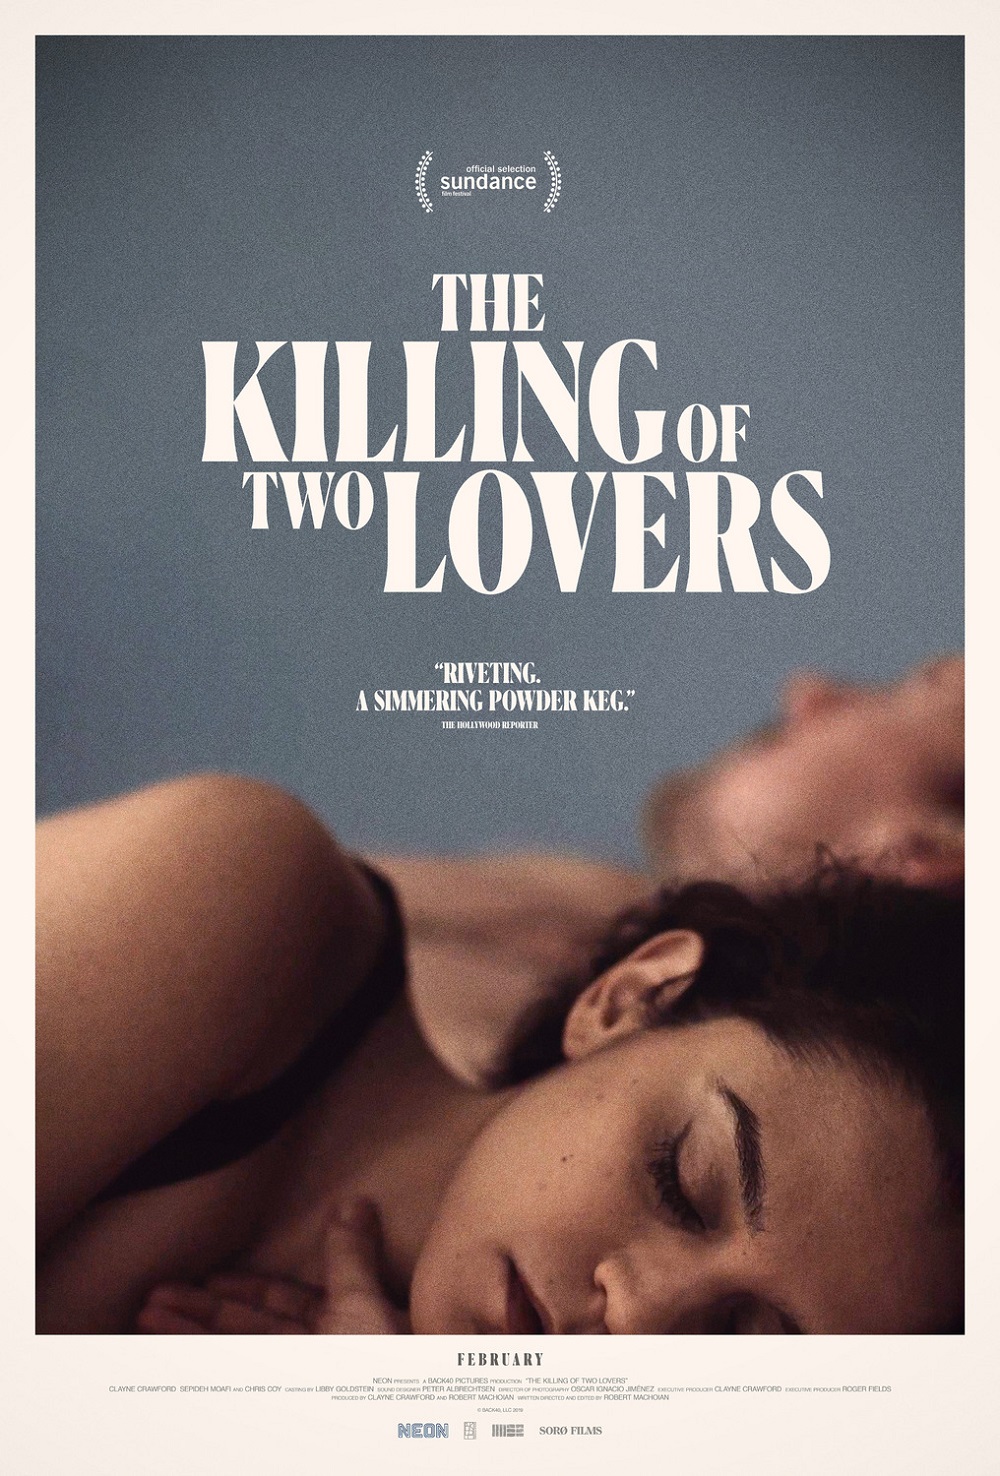 GIFF: The Killing of Two Lovers